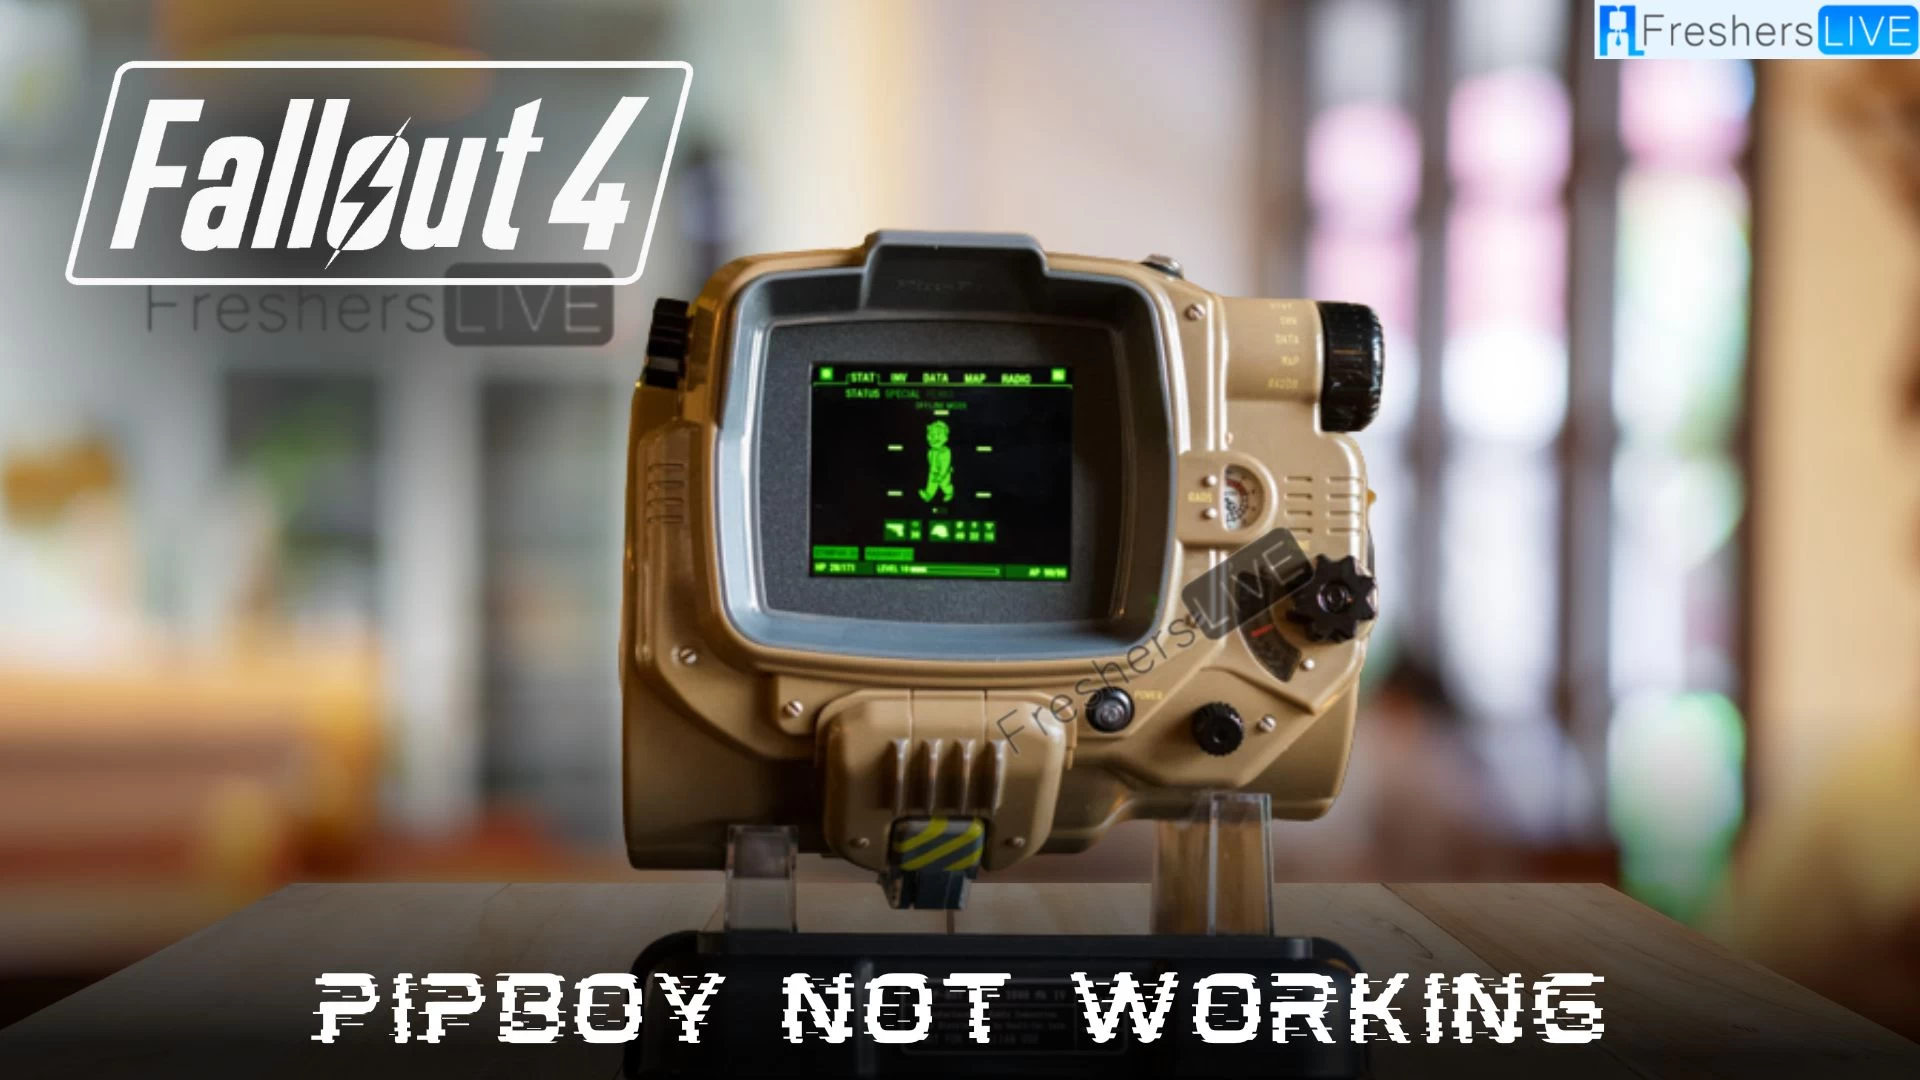 Fallout 4 Pipboy Not Working, How to Fix Fallout 4 Pipboy Not Working?